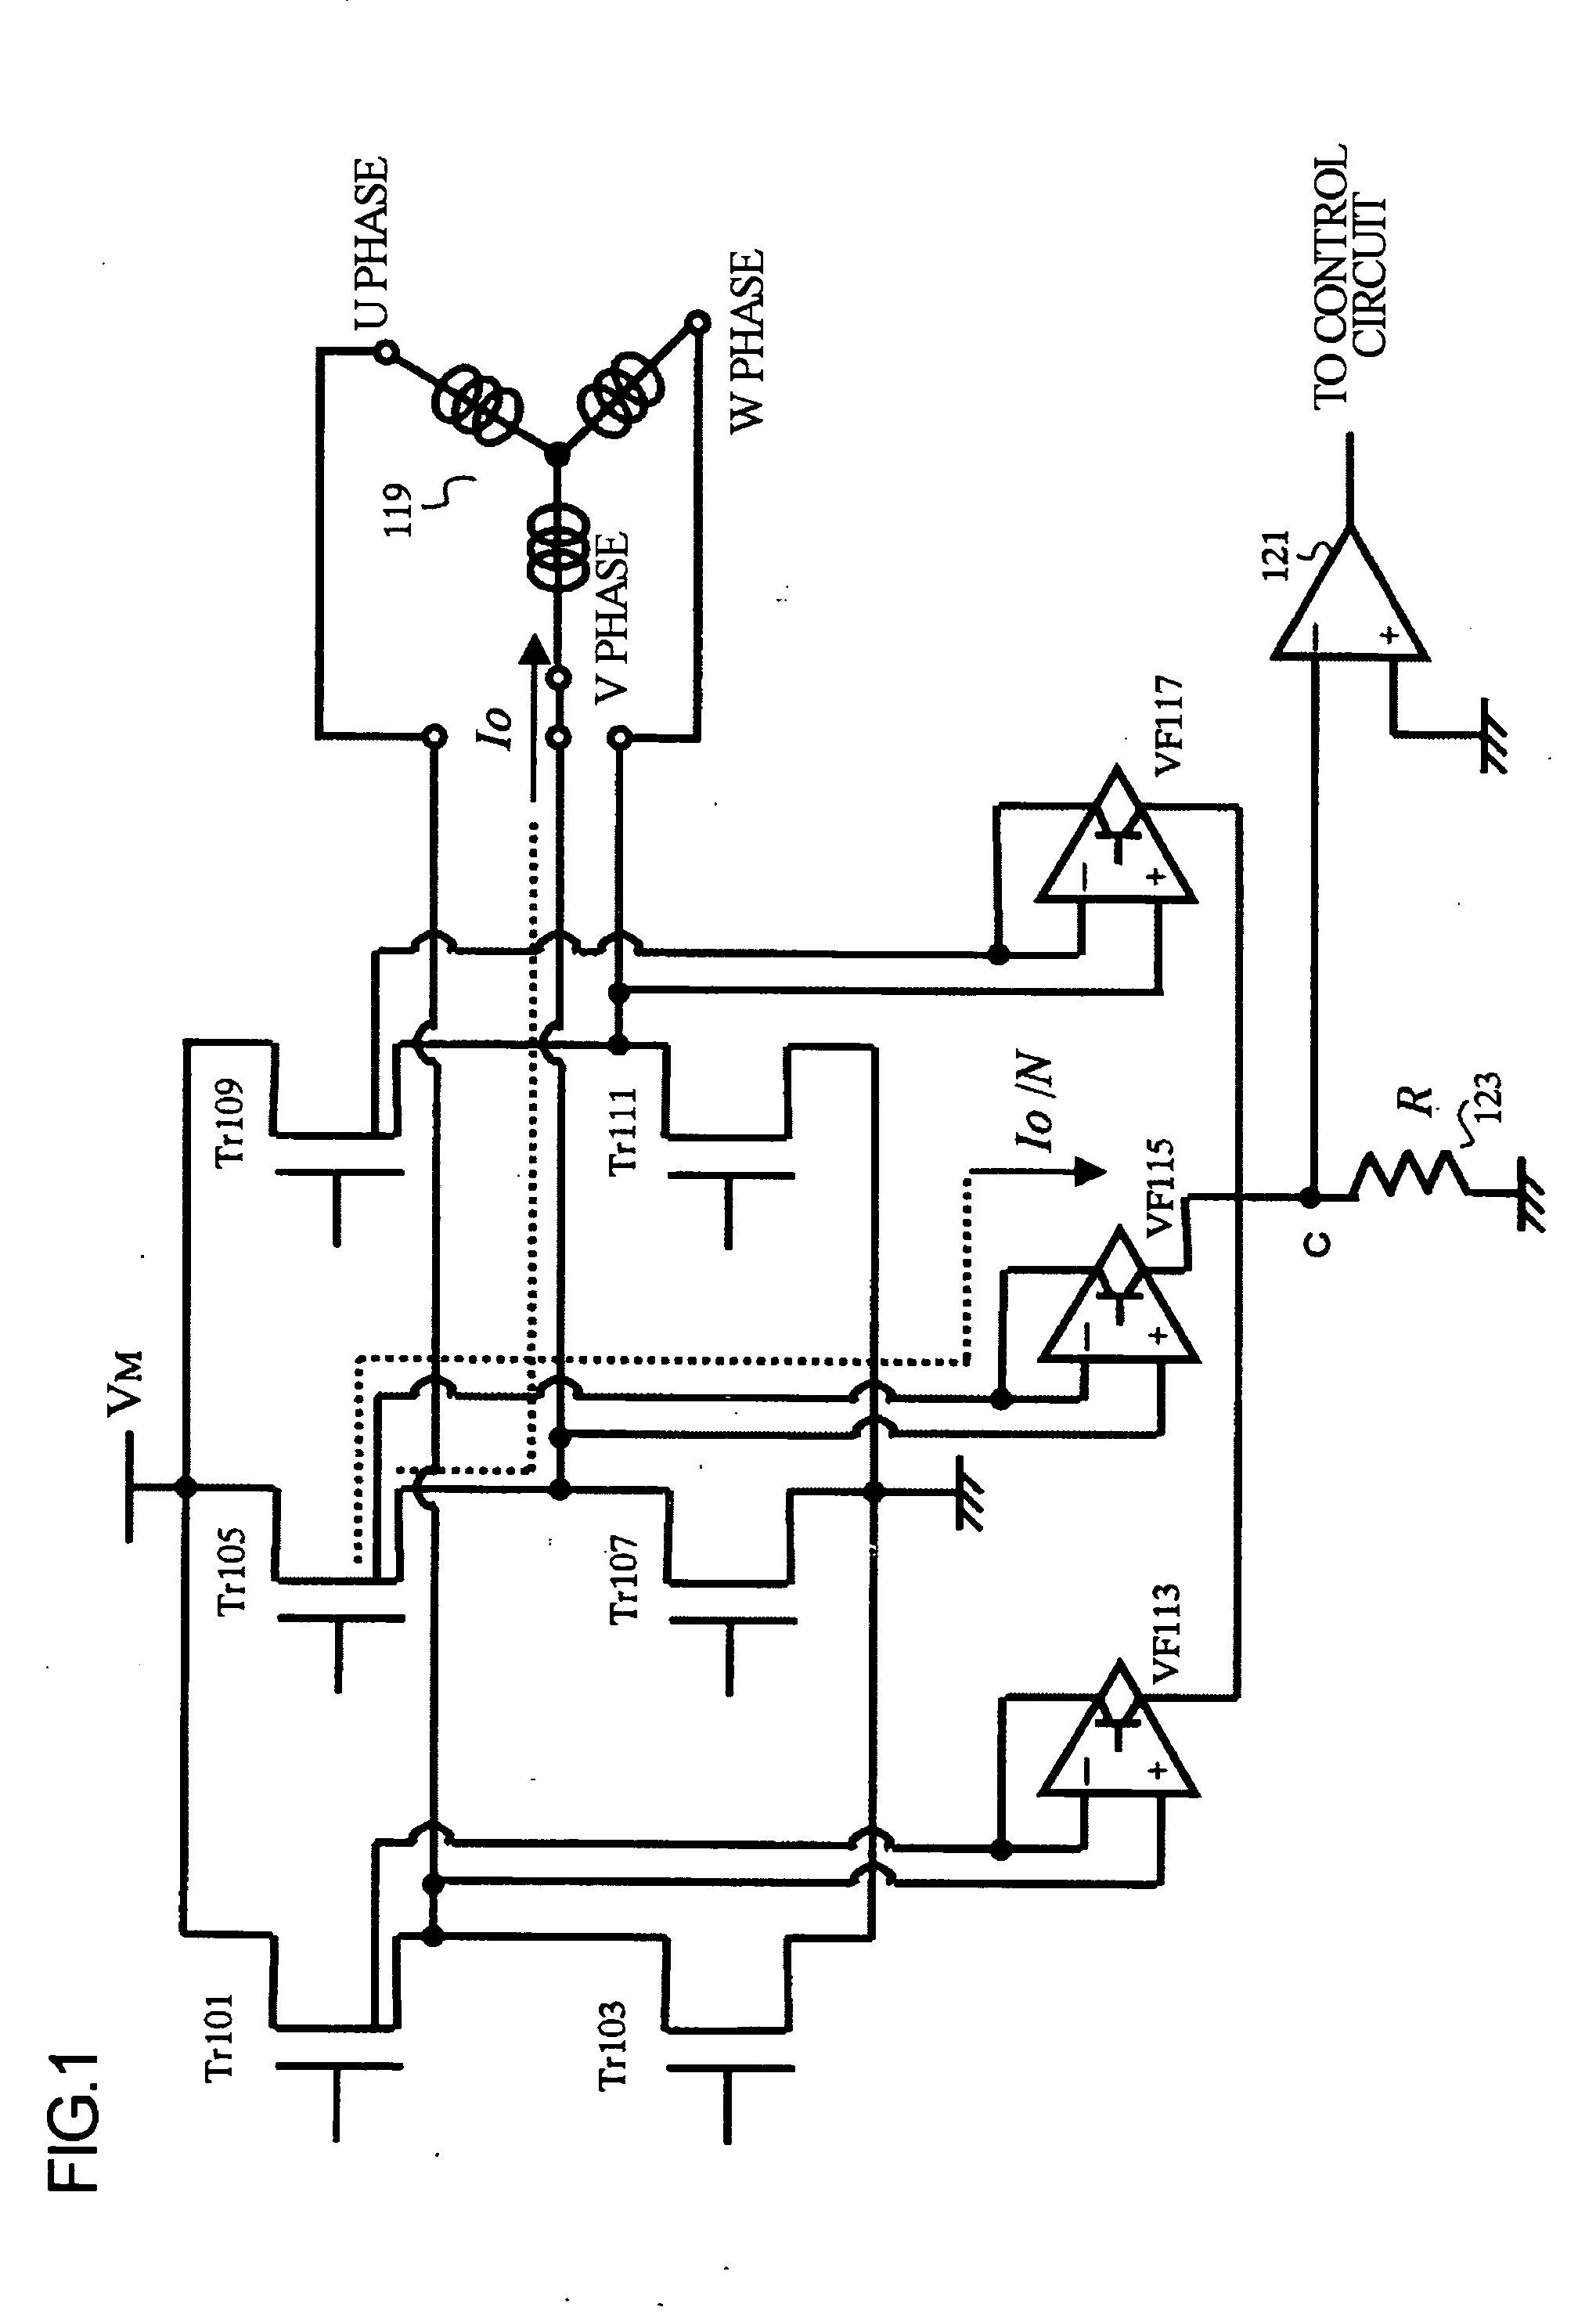 Load driving circuit with current detection capability